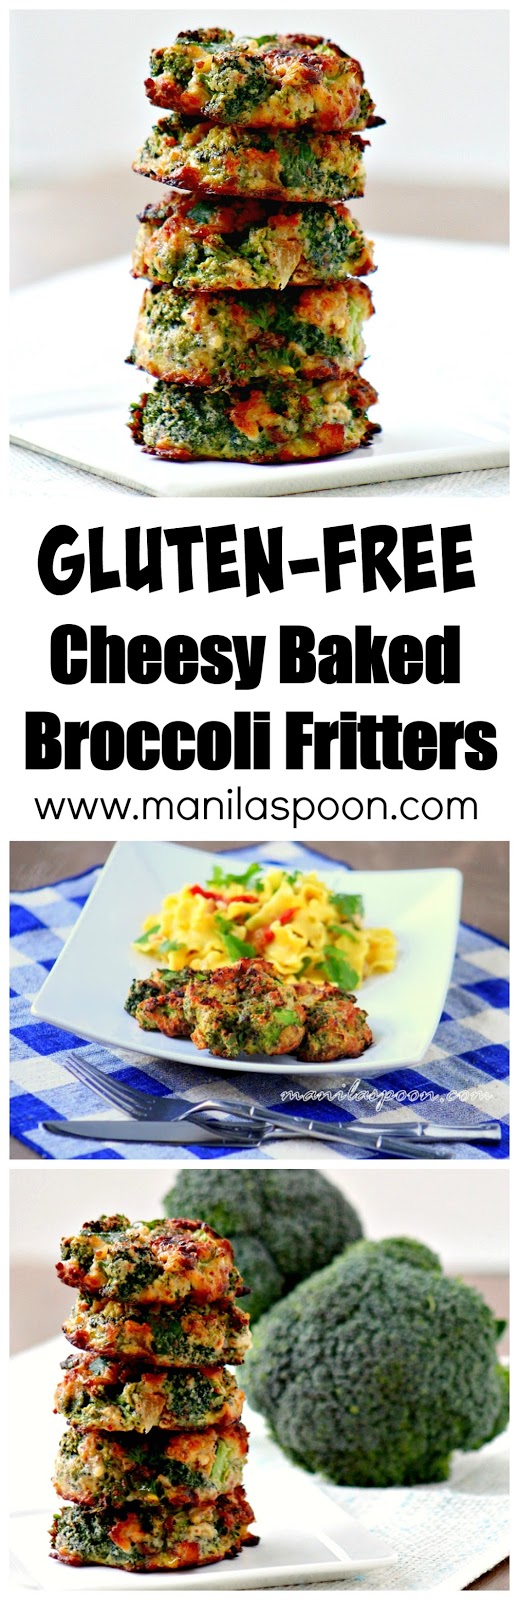 Crunchy, healthy, low-carb and completely gluten-free are these delicious Cheesy Baked Broccoli Fritters! #cheesy #baked #broccoli #fritters #gluten #free #low #carb